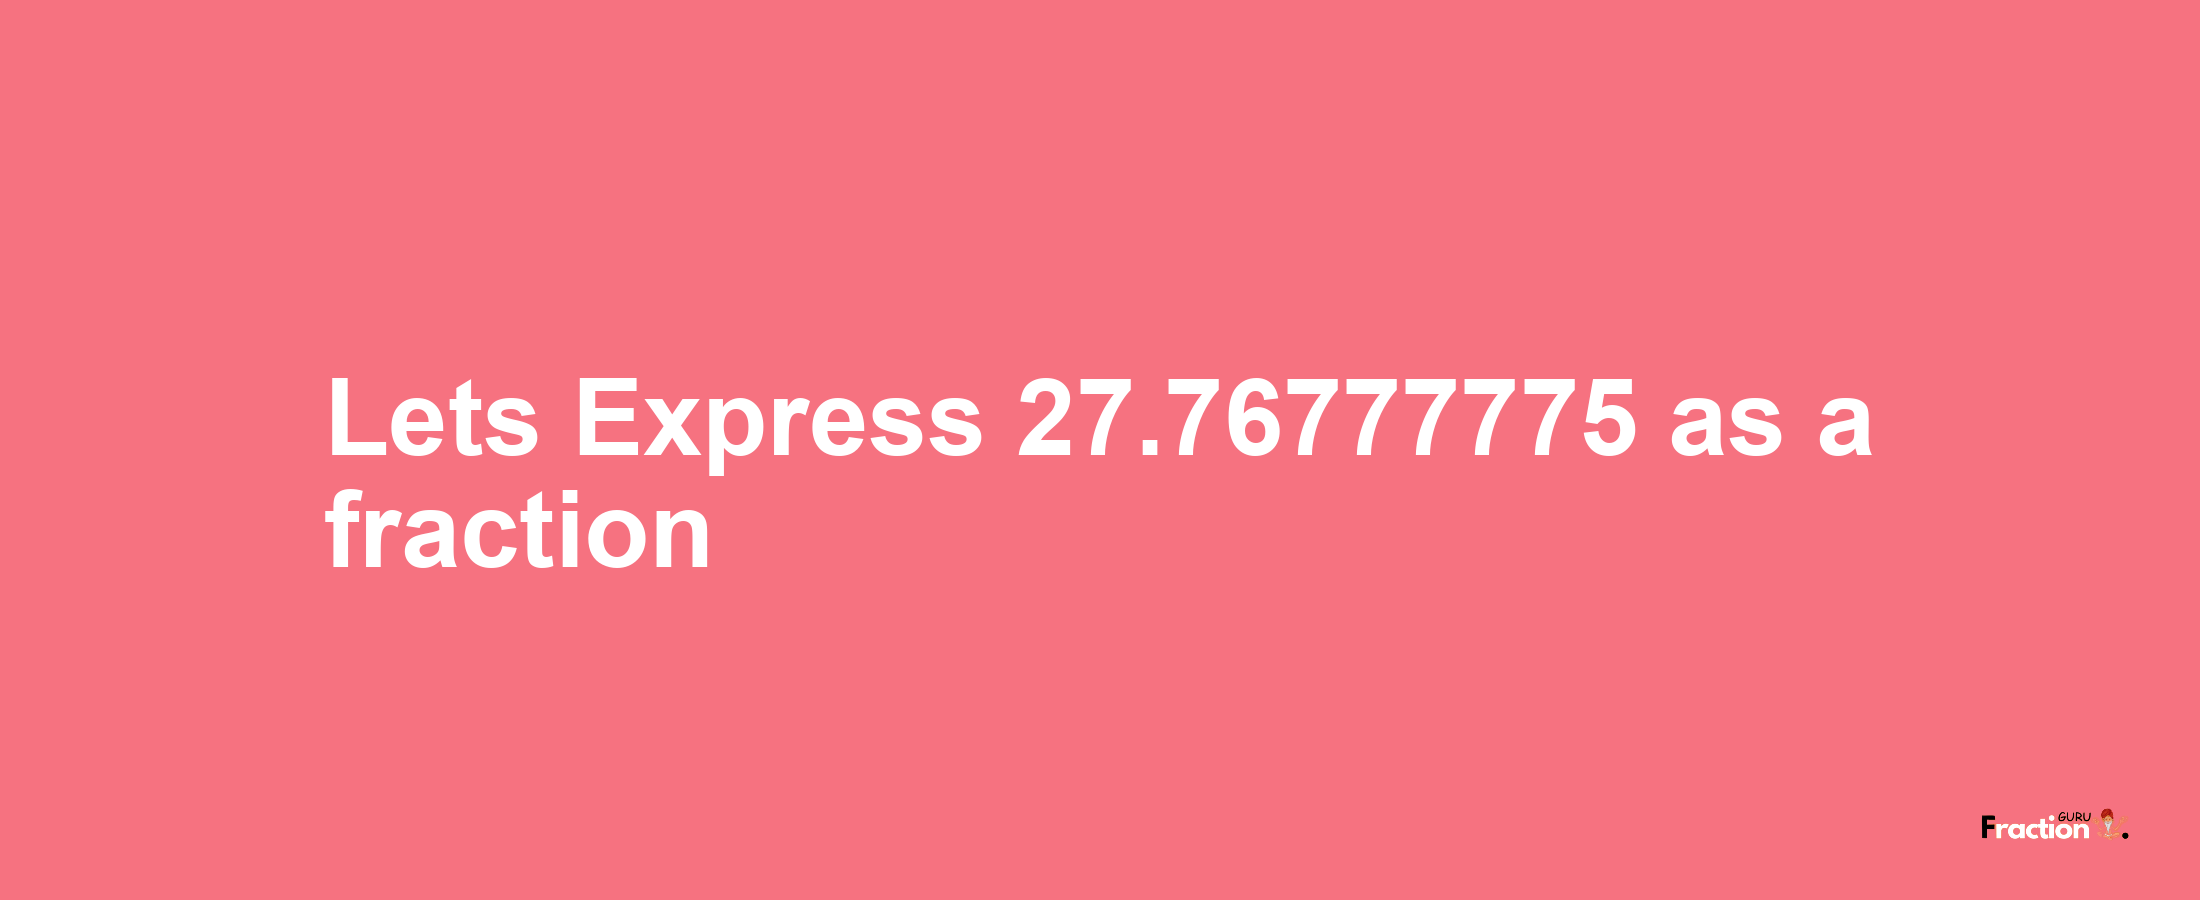 Lets Express 27.76777775 as afraction